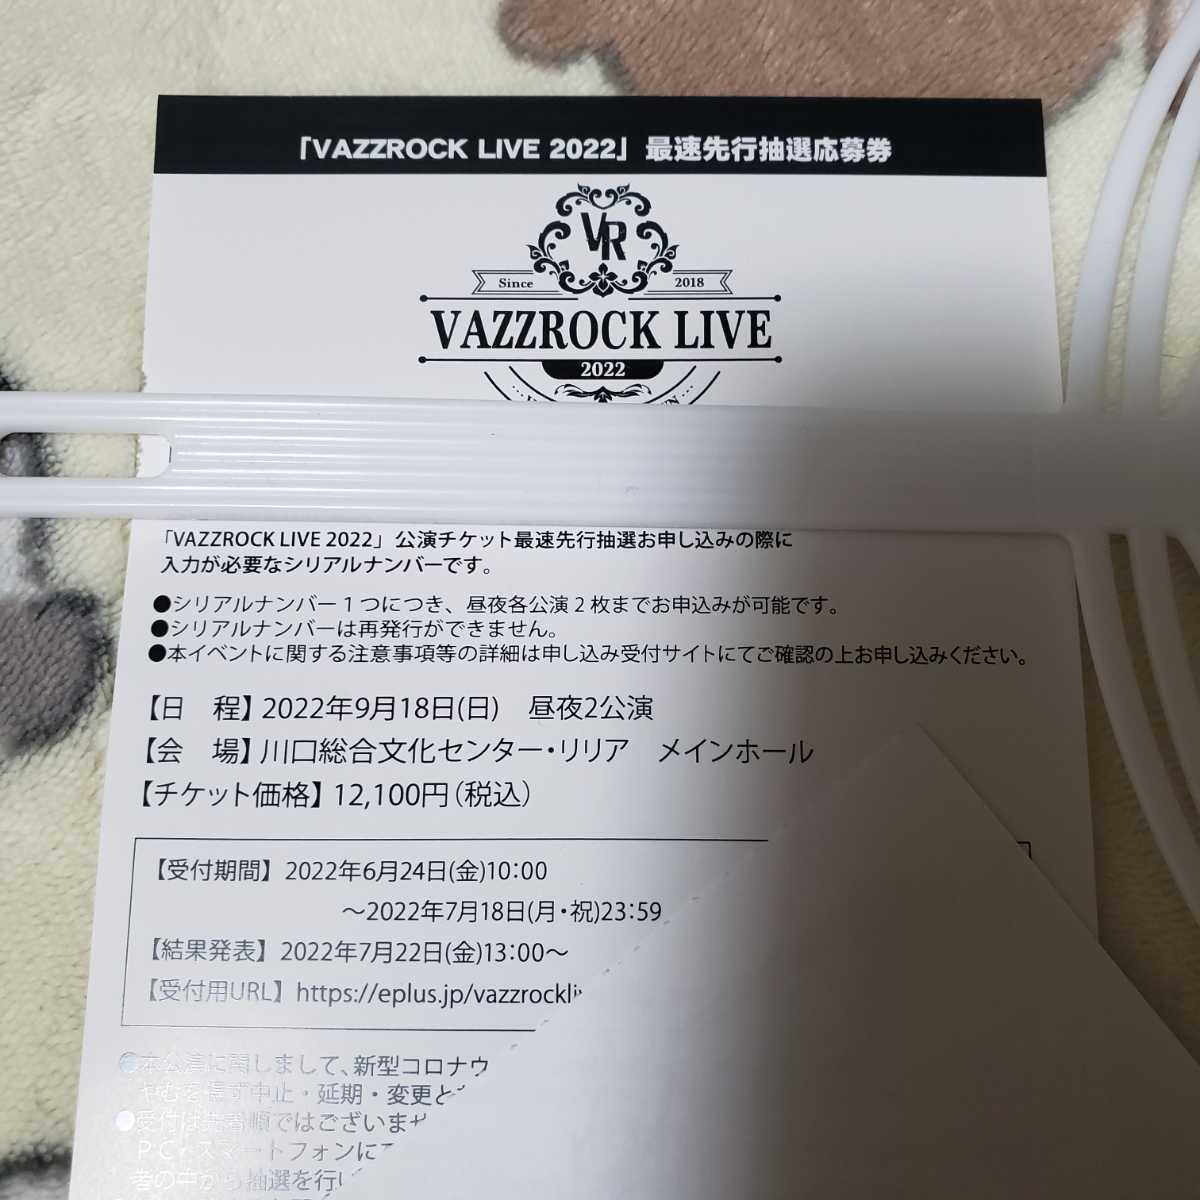 [ Event . included ticket only ]VAZZROCK LIVE 2021 Blu-ray. go in privilege bazlai2022 fastest preceding . selection application ticket serial VAZZY ROCK DOWNbaz lock 